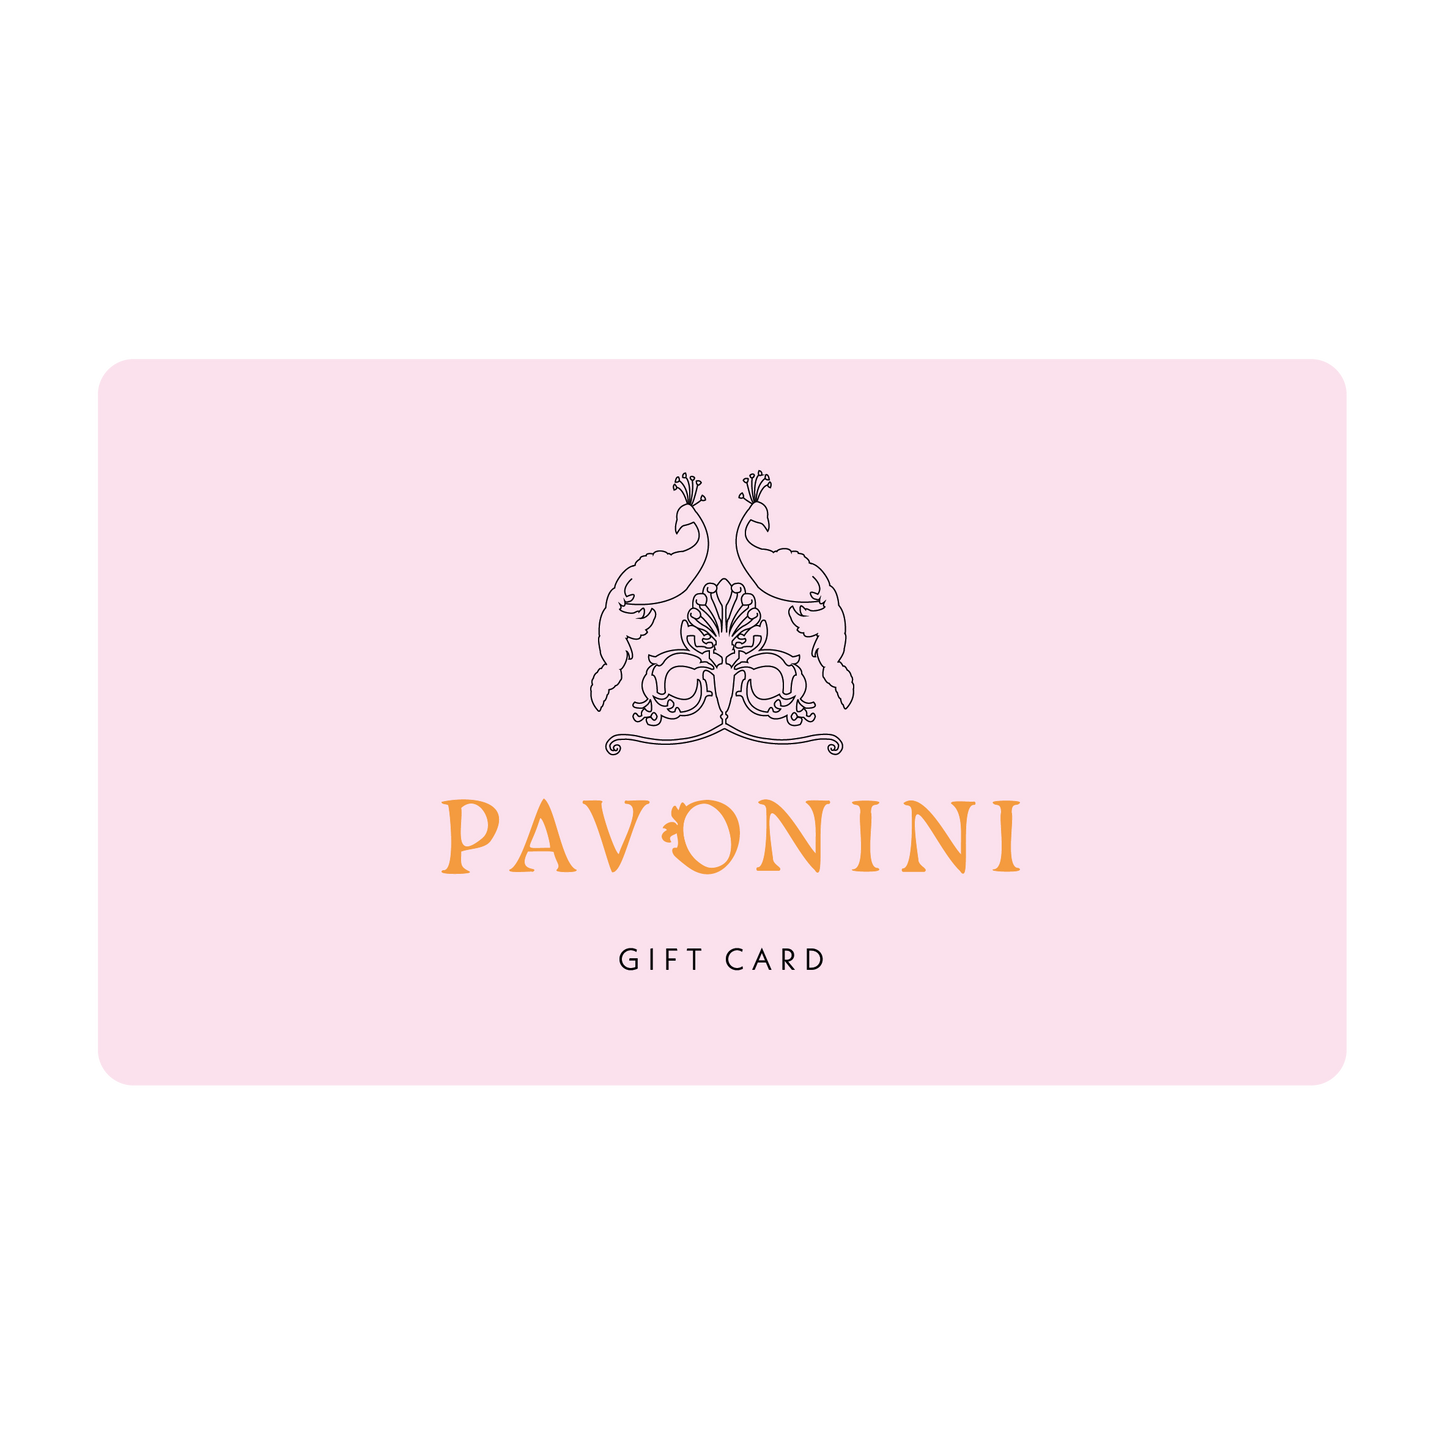 The Pavonini E-Gift Card